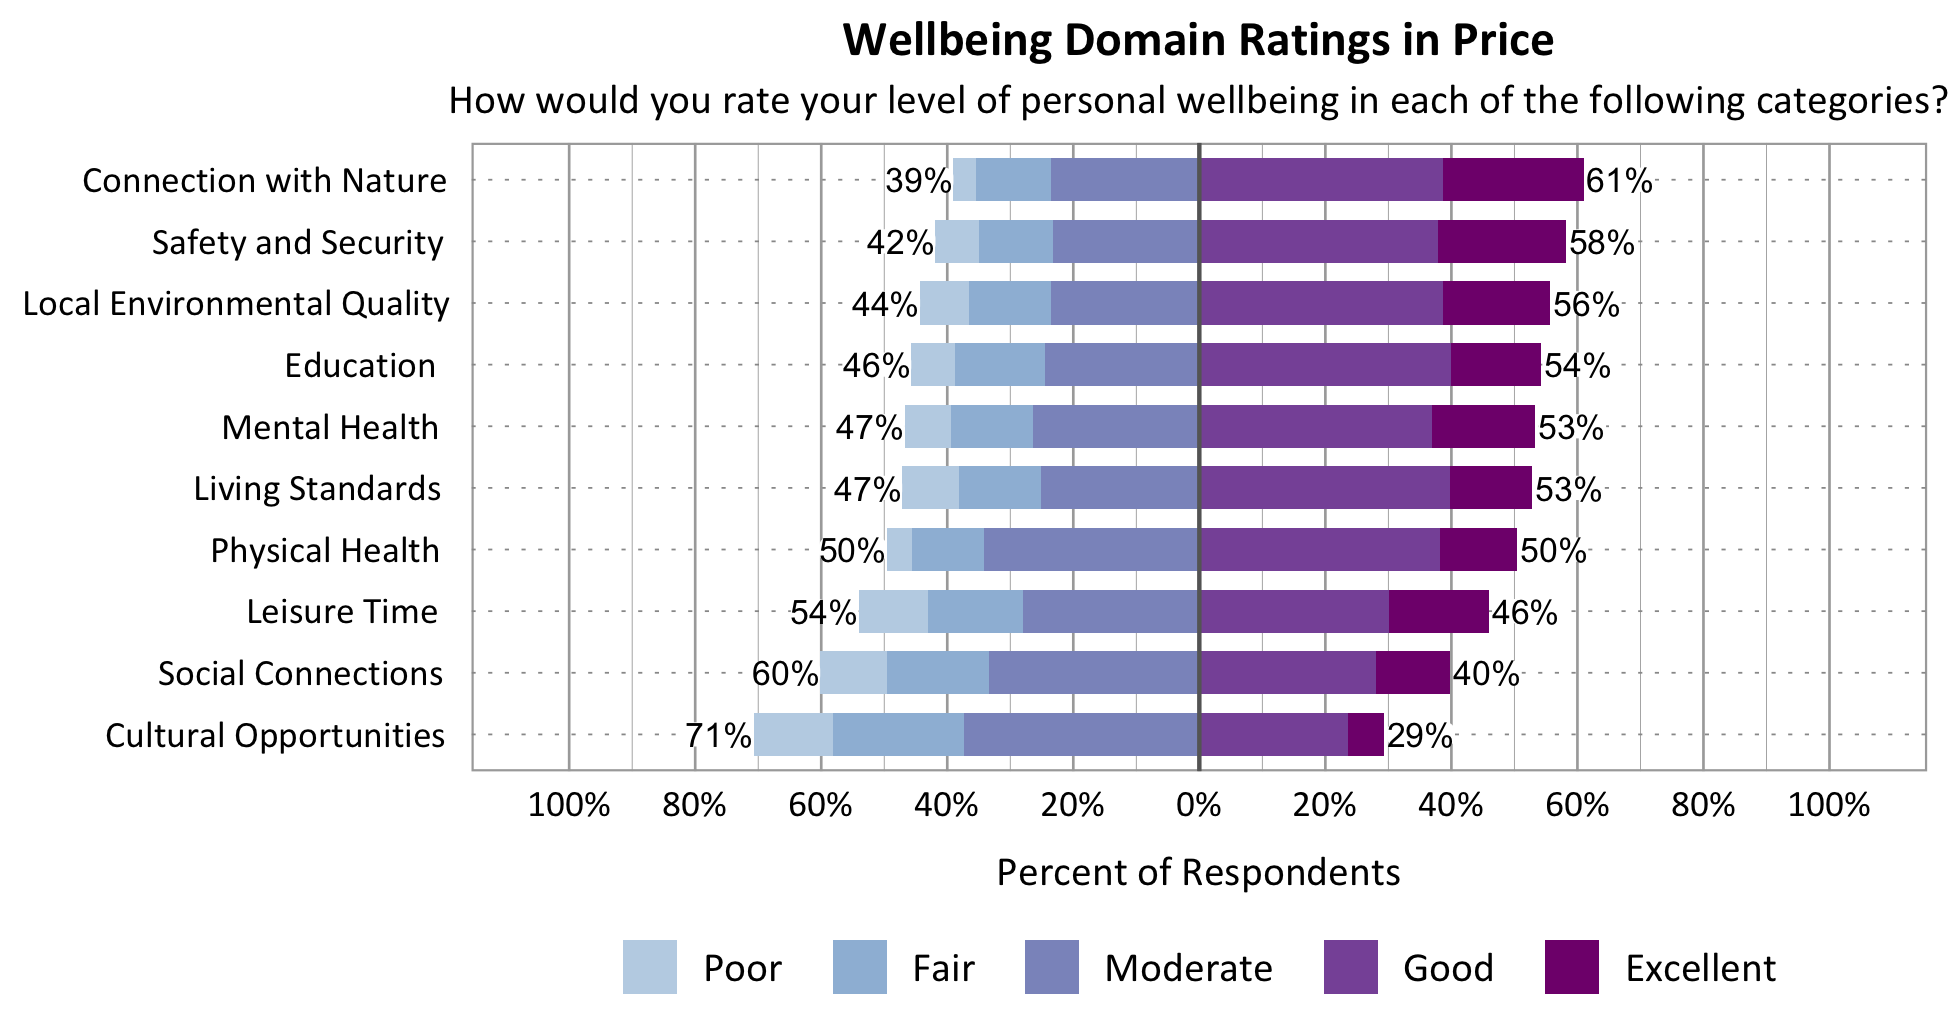 Likert Graph. Title: Wellbeing Domain Ratings in Price. Subtitle: How would you rate your level of personal wellbeing in each of the following categories? Category: Safety and Security - 42% of respondents rated as poor, fair, or moderate while 58% rated as good or excellent; Category: Connection with Nature - 39% of respondents rated as poor, fair, or moderate while 61% rated as good or excellent; Category: Local Environmental Quality- 44% of respondents rated as poor, fair, or moderate while 56% rated as good or excellent; Category: Education - 46% of respondents rated as poor, fair, or moderate while 54% rated as good or excellent; Category: Living Standards - 47% of respondents rated as poor, fair, or moderate while 53% rated as good or excellent; Category: Mental Health - 47% of respondents rated as poor, fair, or moderate while 53% rated as good or excellent; Category: Leisure Time - 54% of respondents rated as poor, fair or moderate while 46% rated as good or excellent; Category: Physical Health - 50% of respondents rated as poor, fair, or moderate while 50% rated as good or excellent; Category: Social Connections - 60% of respondents rated as poor, fair, or moderate while 40% rated as good or excellent; Category: Cultural Opportunities - 71% of respondents rated as poor, fair or moderate while 29% rated as good or excellent.